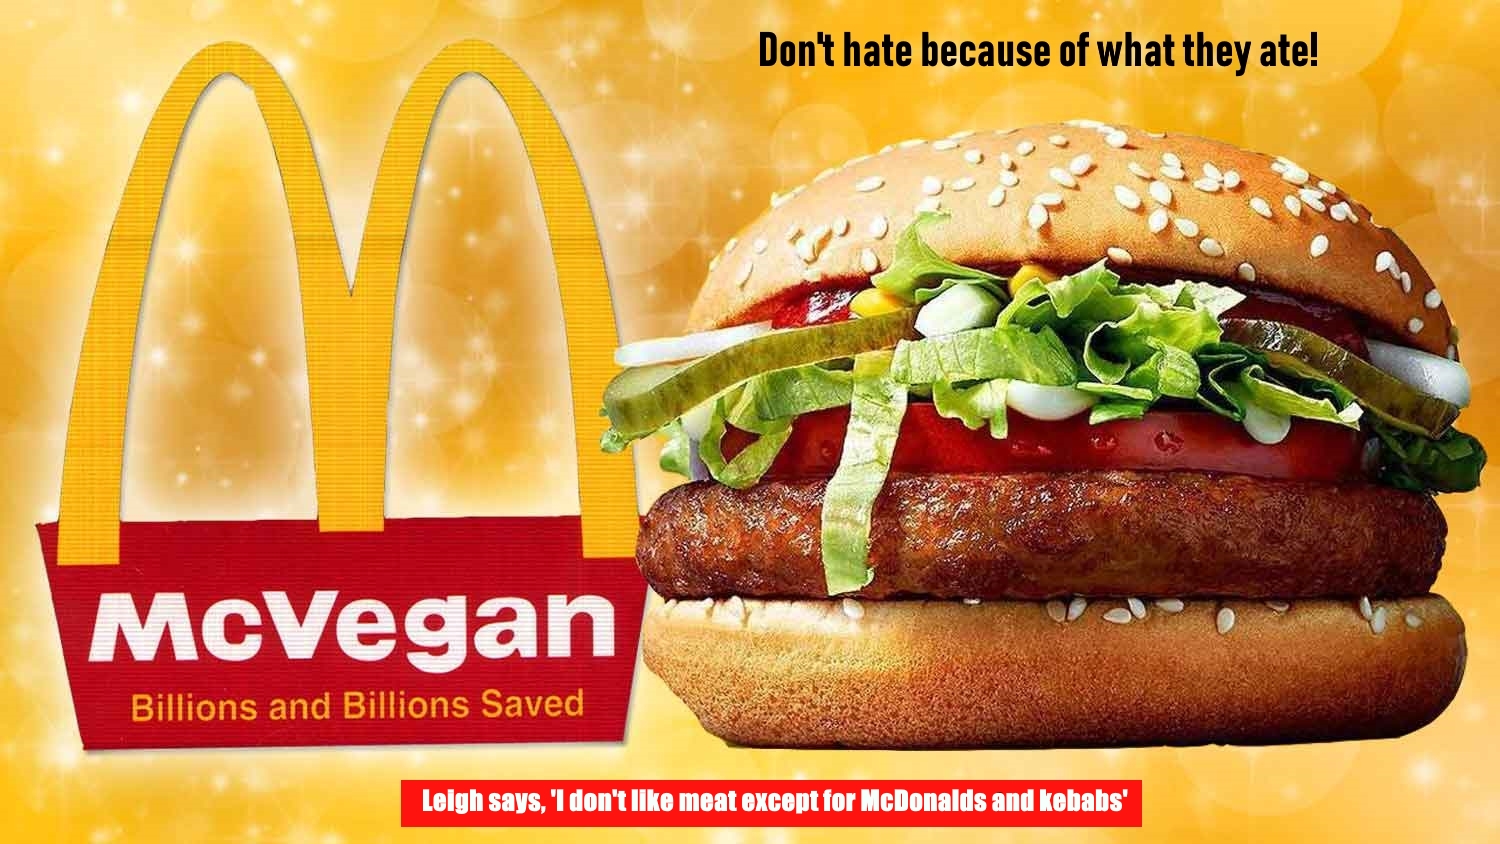 Well burger me! Are Mac’s doing the BIG thing and going vegan or not?